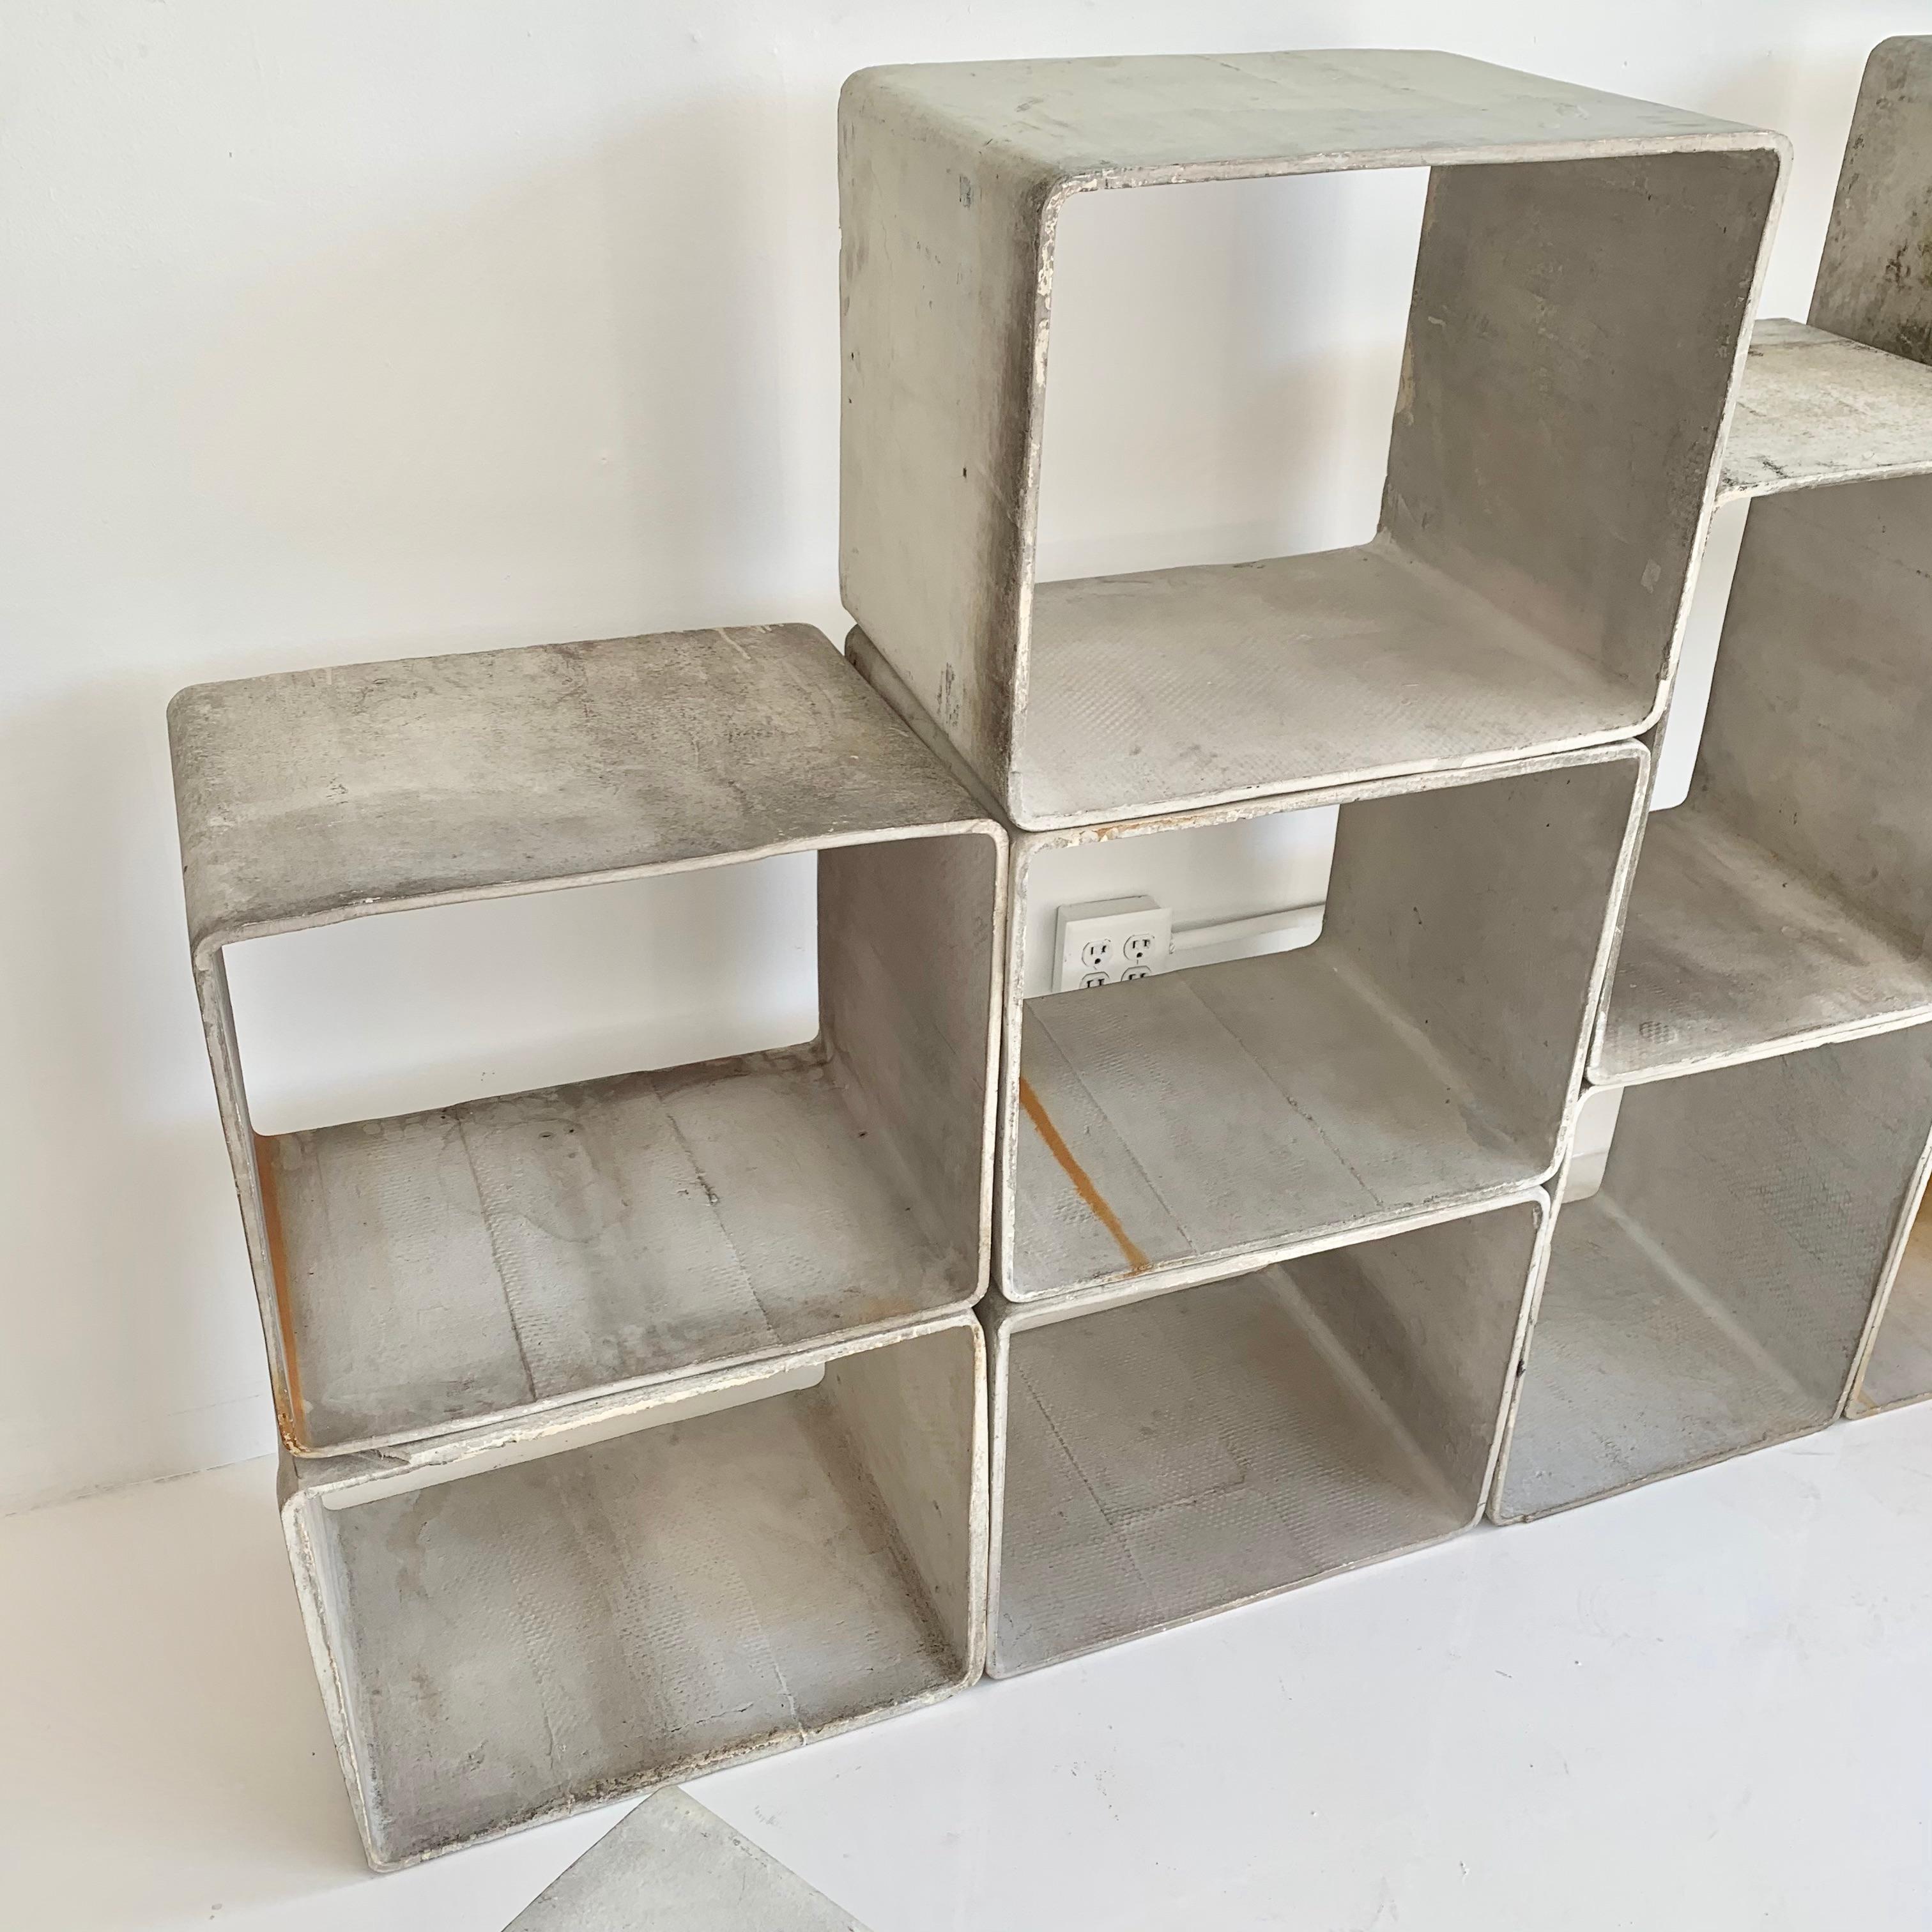 Mid-20th Century Monumental Willy Guhl Concrete Bookcase